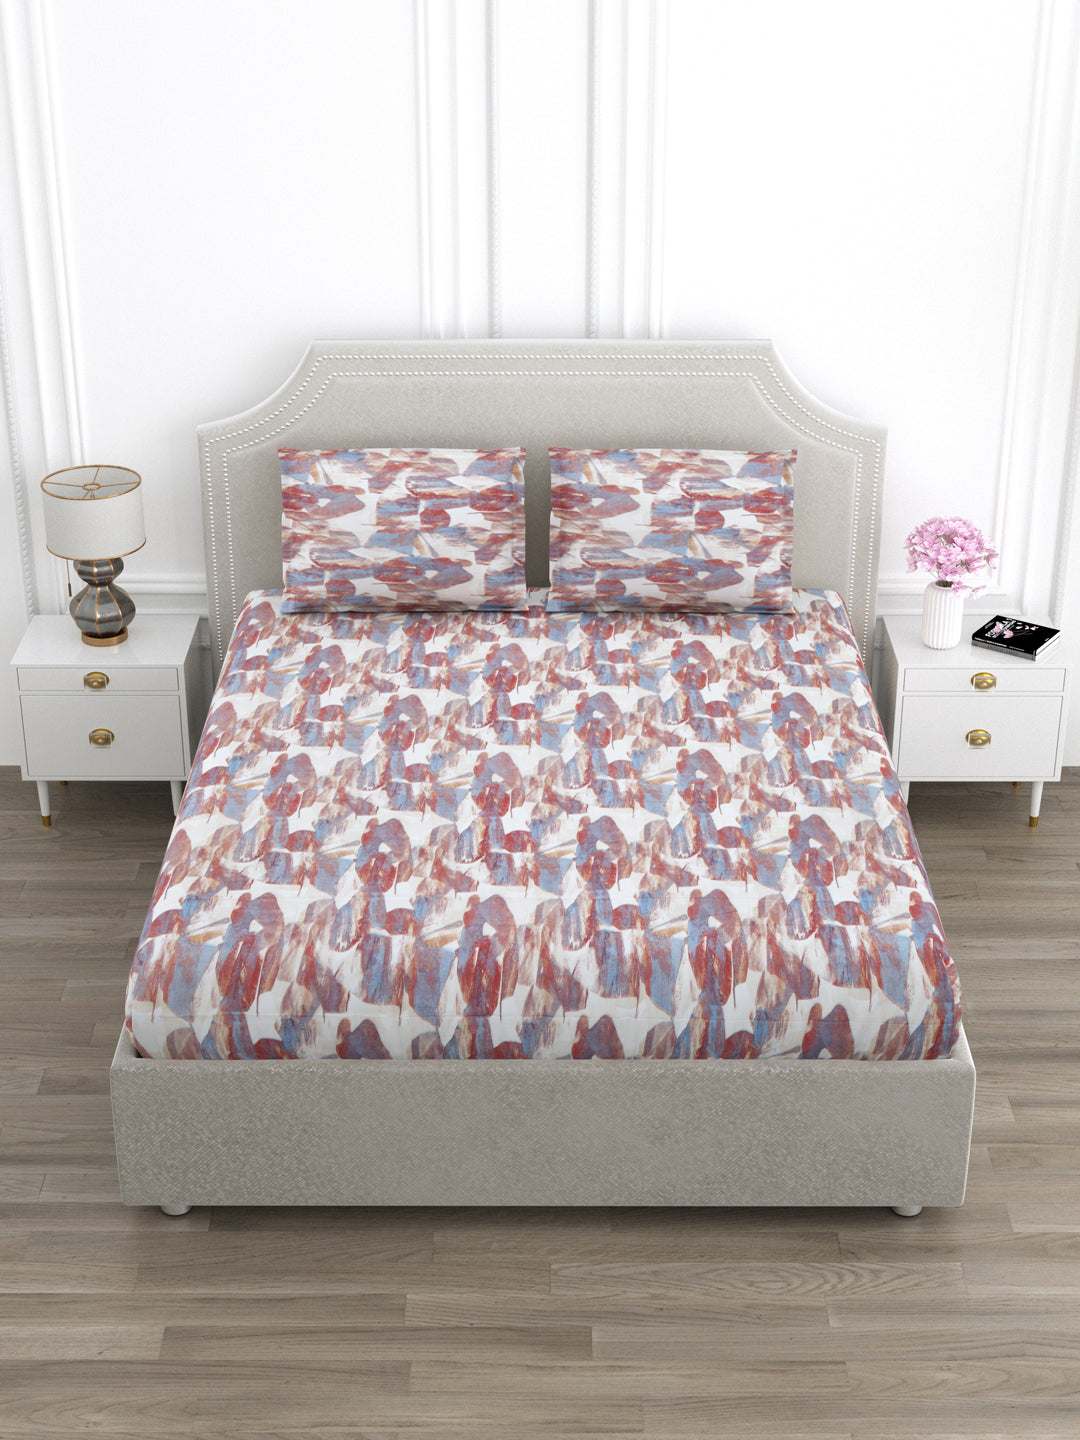 Multi Color Abstract Print King Size Bed Cotton Linen